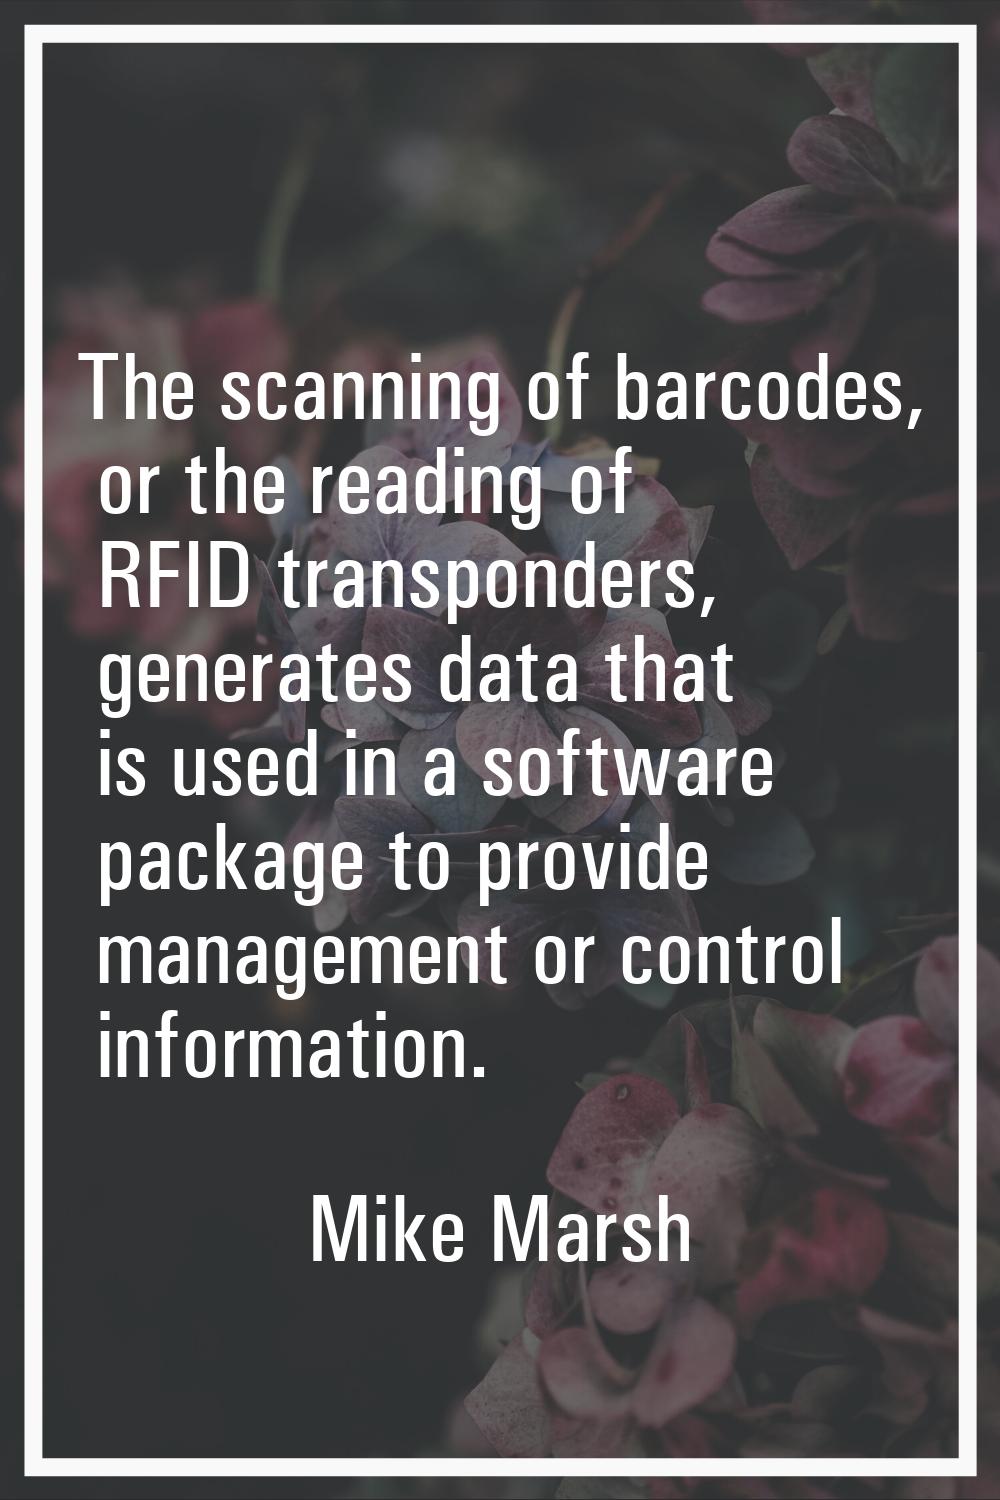 The scanning of barcodes, or the reading of RFID transponders, generates data that is used in a sof